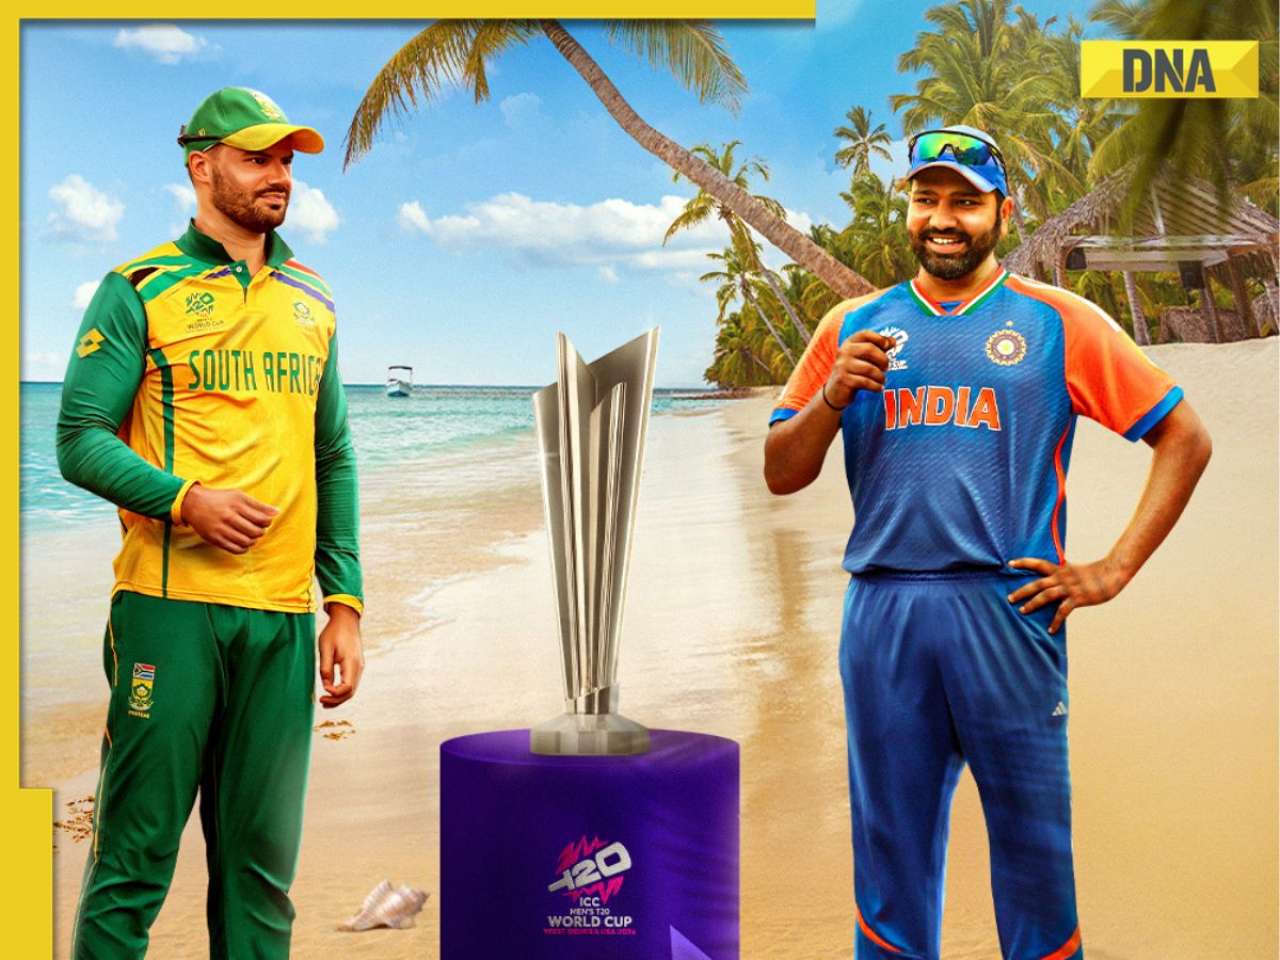 IND vs SA, T20 World Cup Final: Reserve day rules, playing conditions, cut-off time - All you need to know